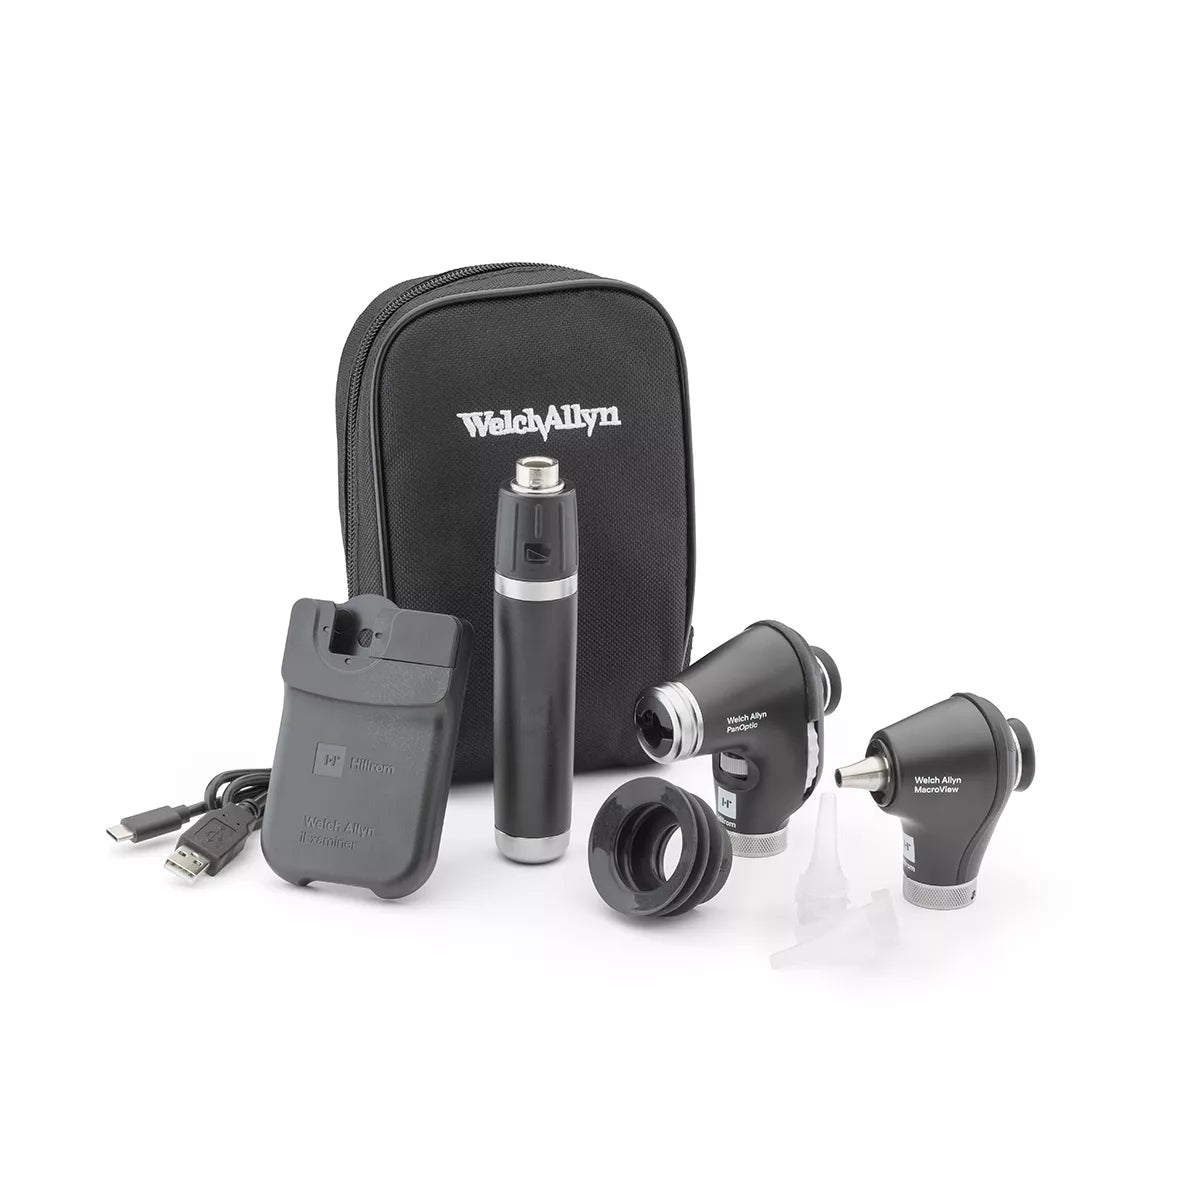 Welch Allyn 3.5V Diagnostic Set with PanOptic Plus LED Ophthalmoscope, MacroView Plus LED Otoscope for iExaminer with soft carrying case Welch Allyn